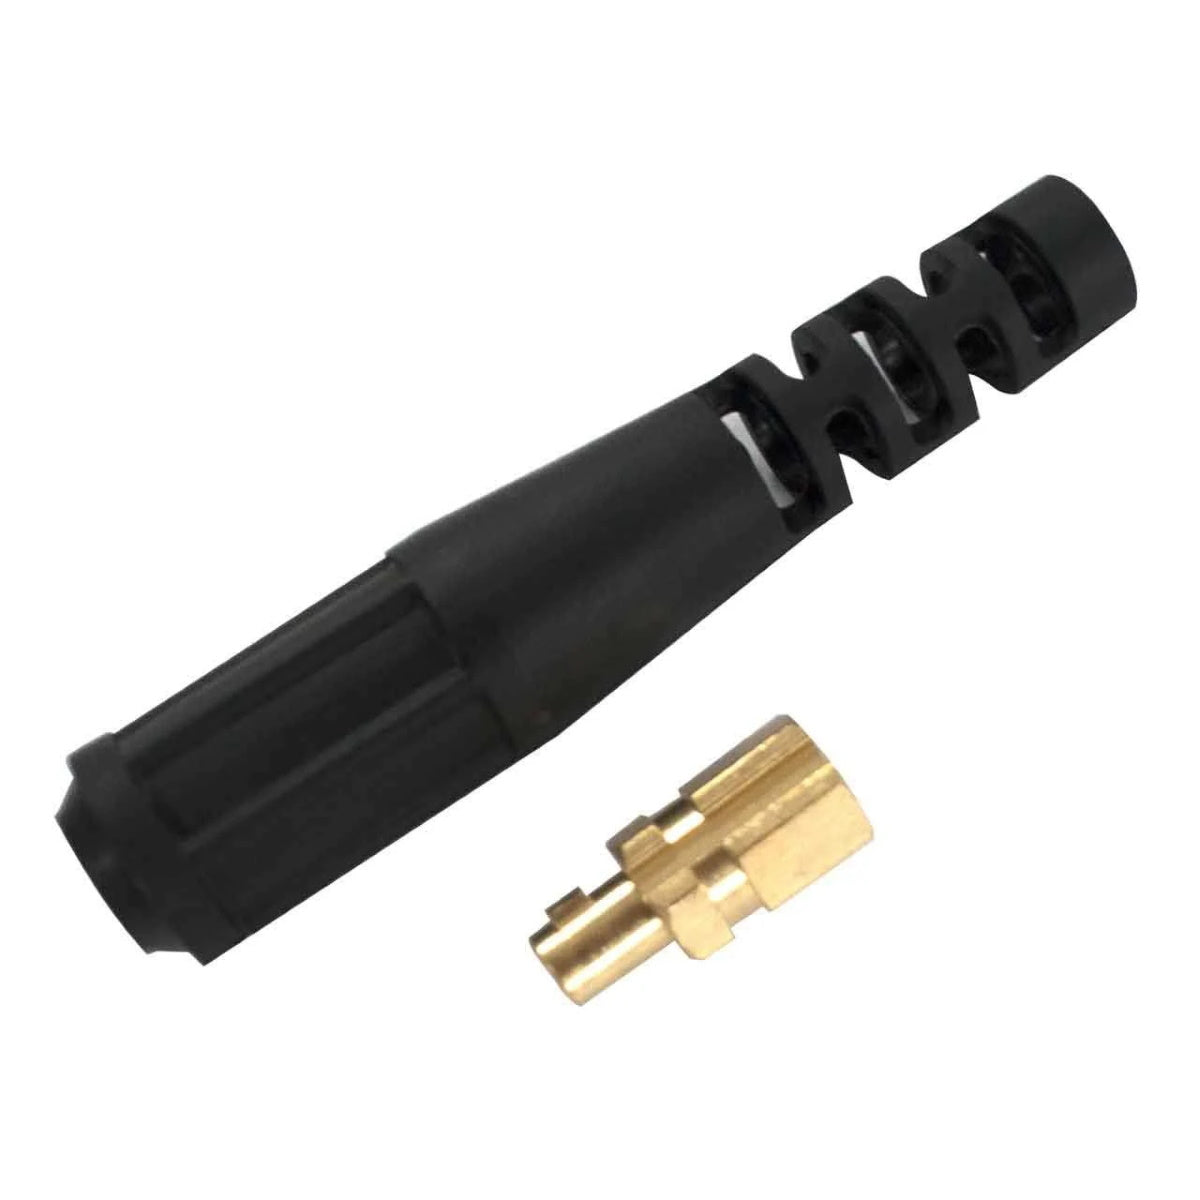 Miller 25 (3/8") Air-Cooled TIG Torch Adapter (273483)